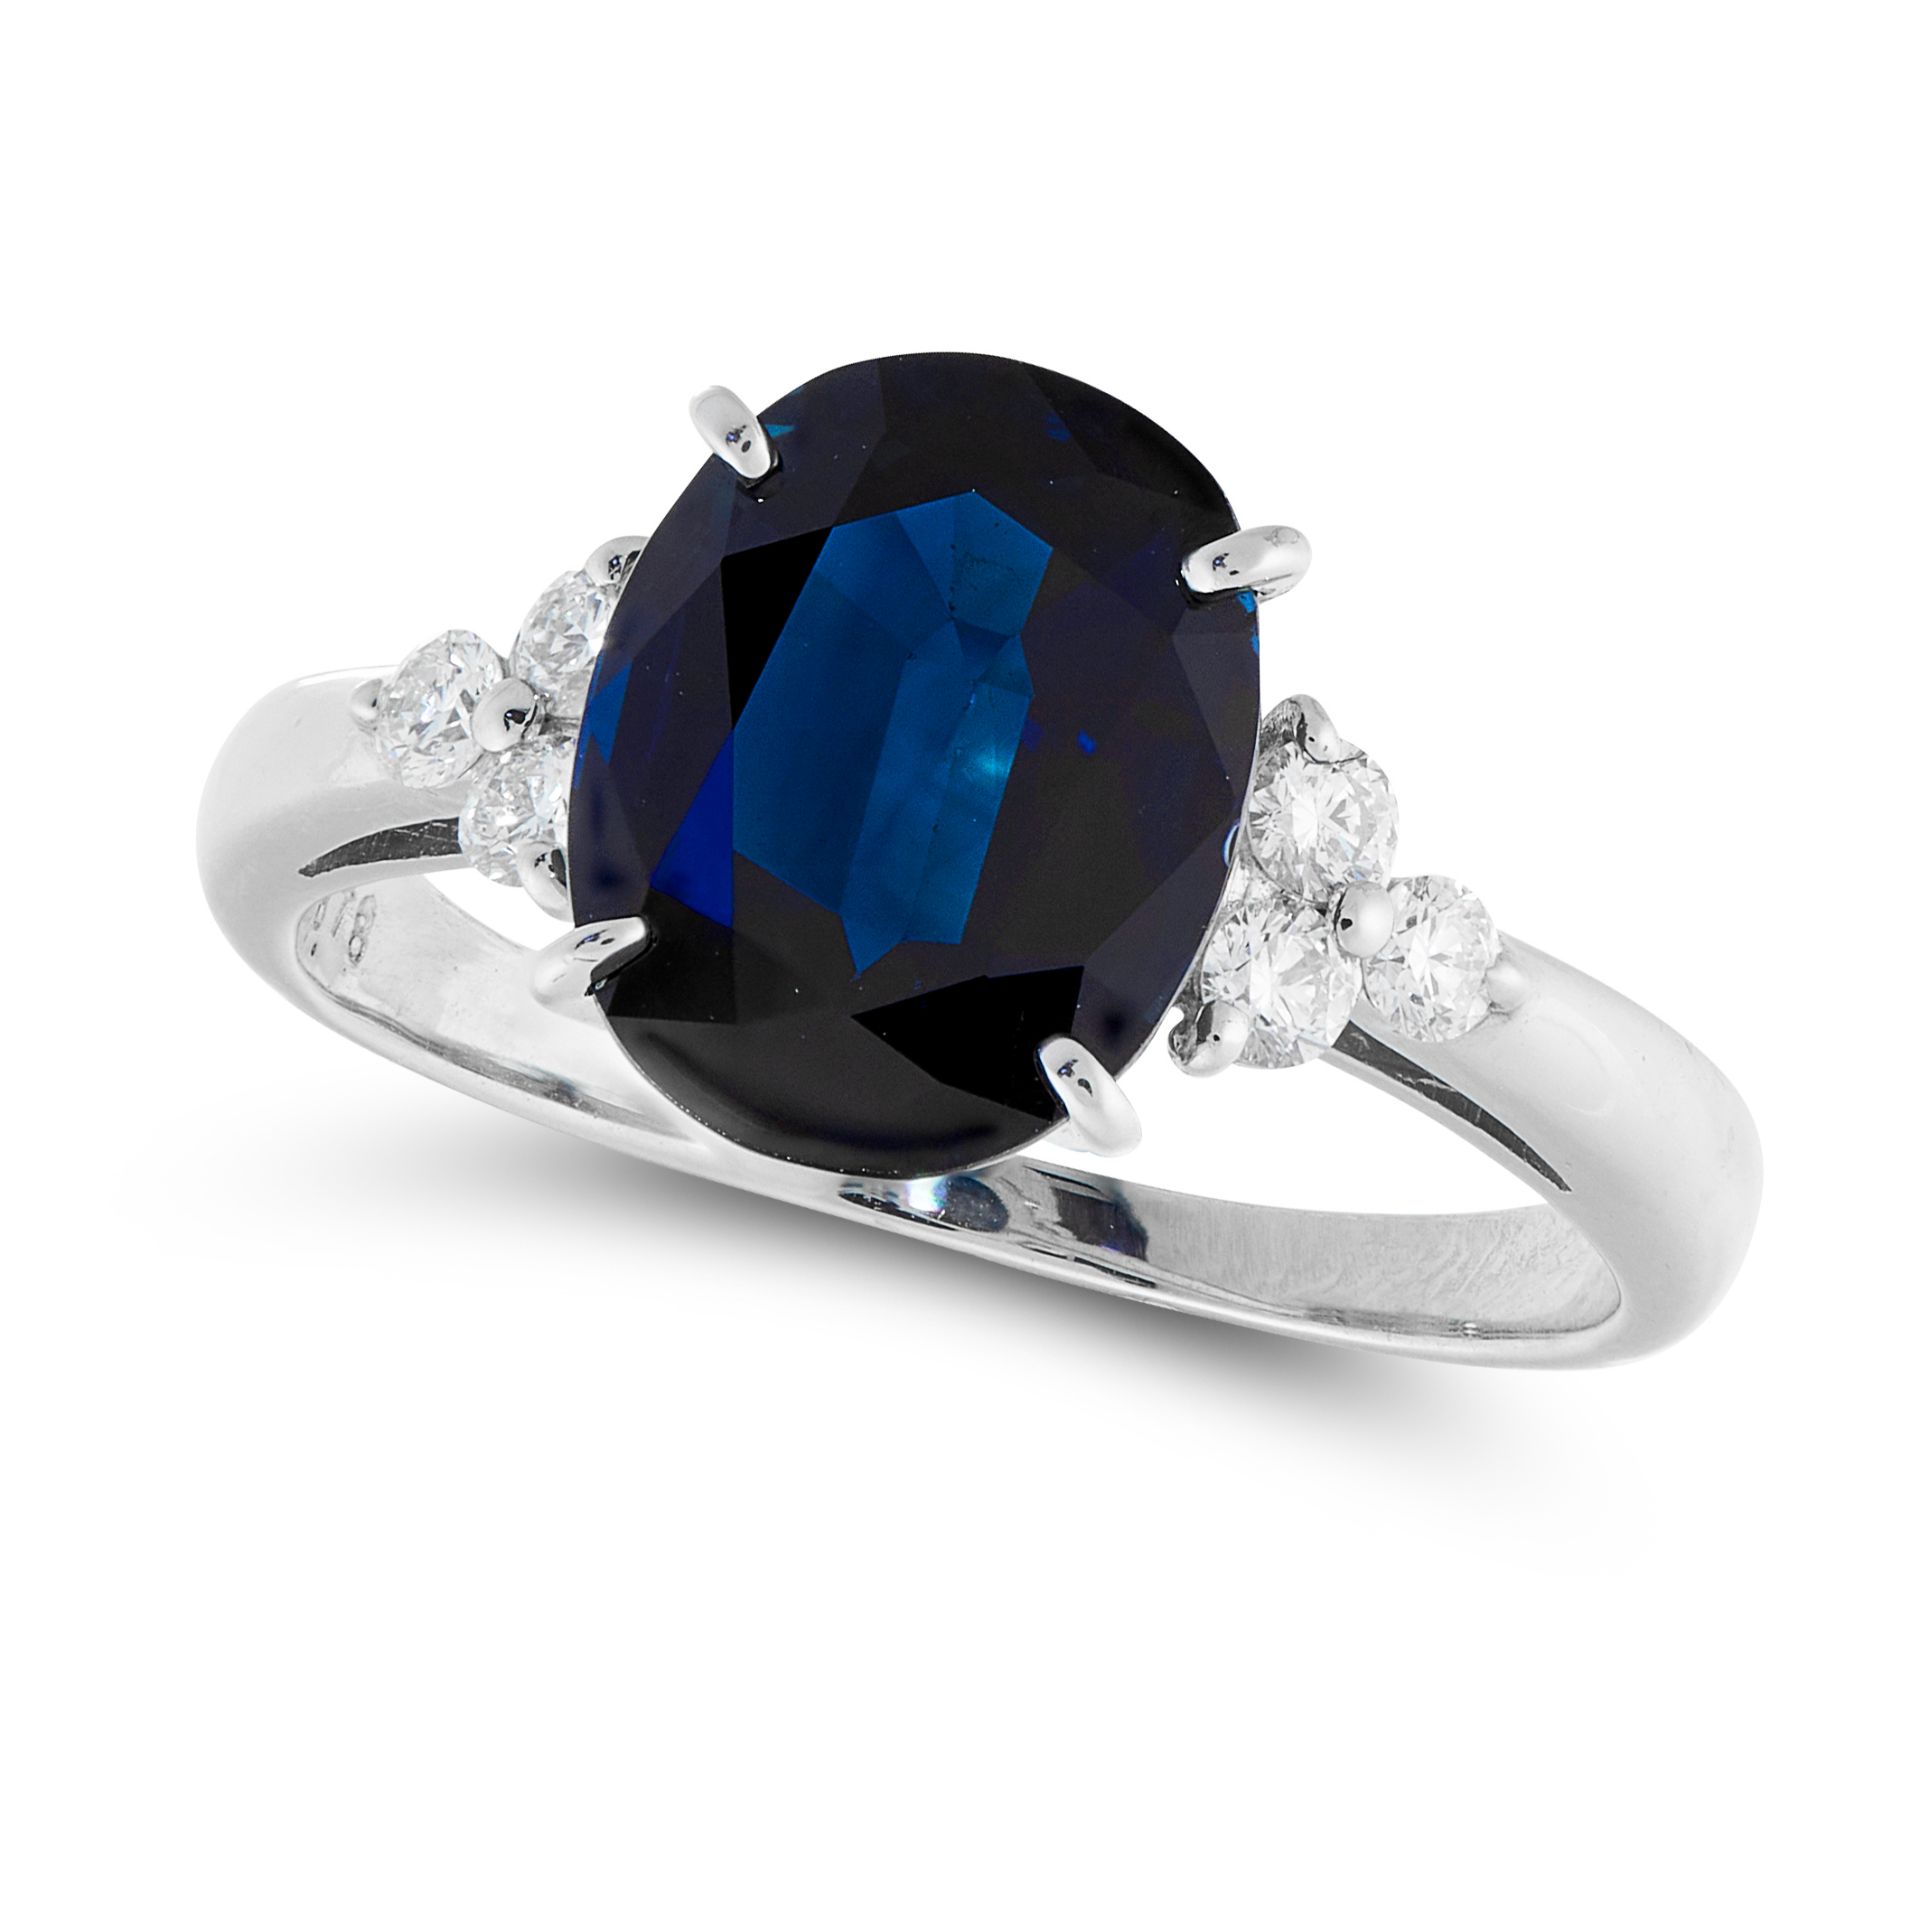 A SAPPHIRE AND DIAMOND RING in platinum, set with an oval cut sapphire of 2.78 carats between a trio